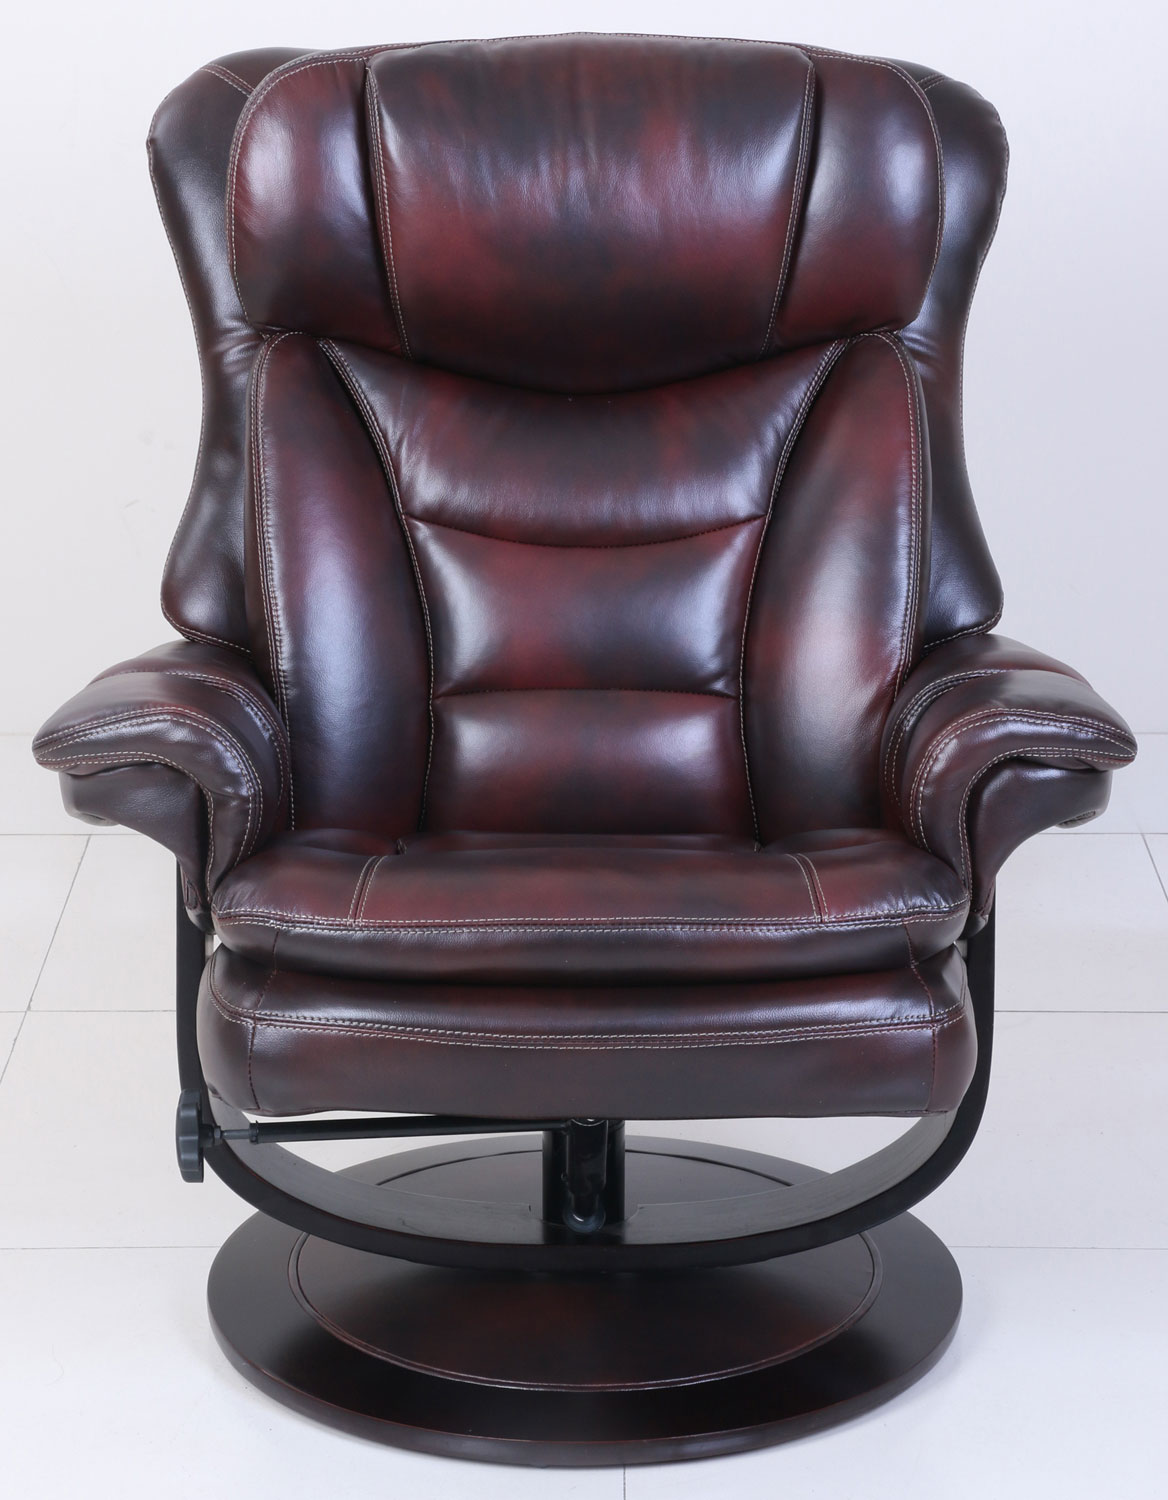 Barcalounger Roscoe Pedestal Recliner Chair and Ottoman - Plymouth Mahogany/Leather Match